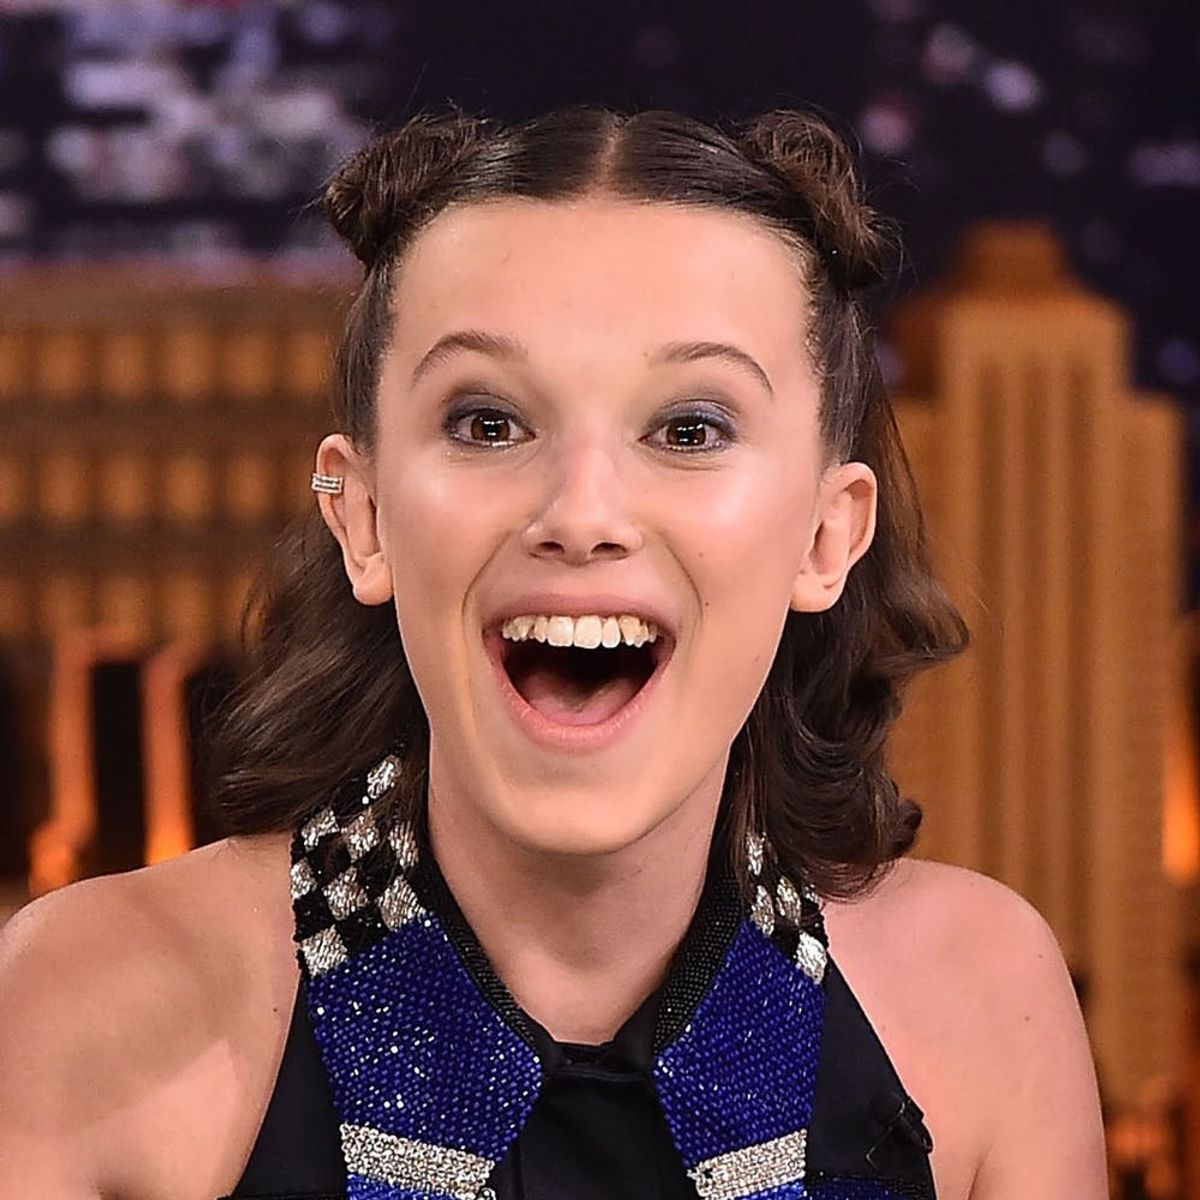 “Stranger Things” Star Millie Bobby Brown Just Revealed This Seriously Surprising Fact About Herself